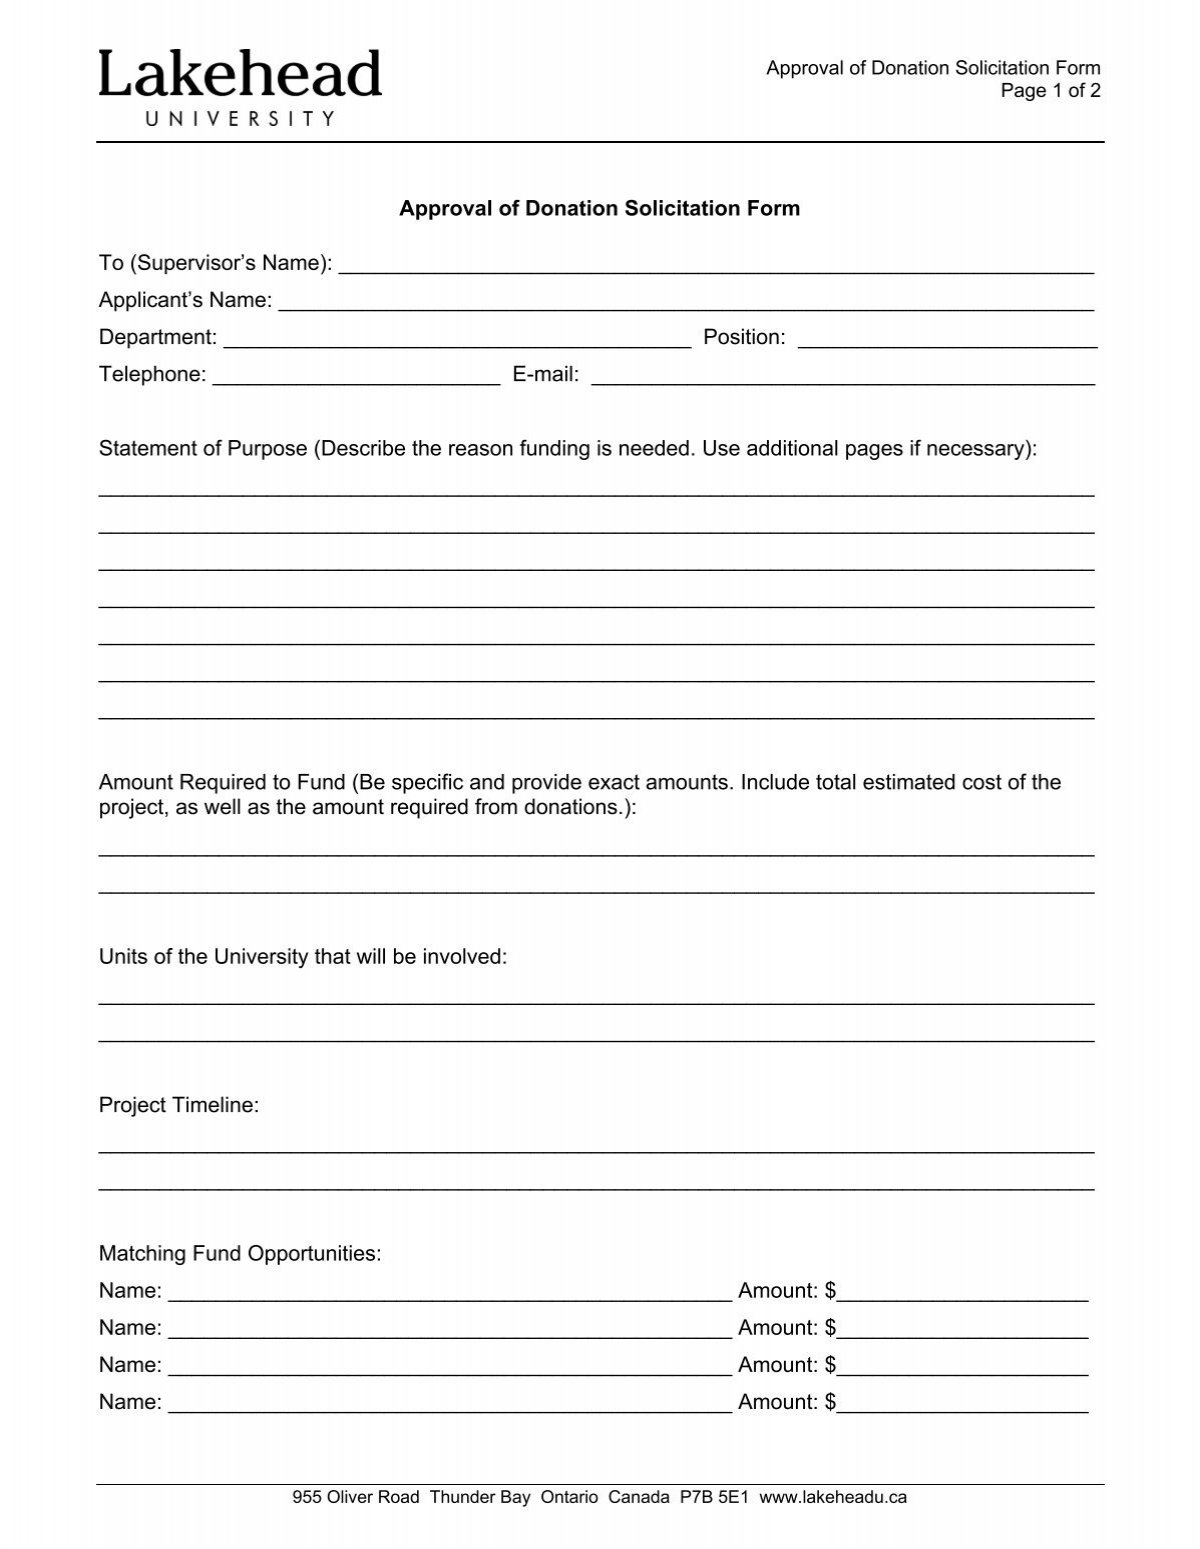 approval-of-donation-solicitation-form-lakehead-university